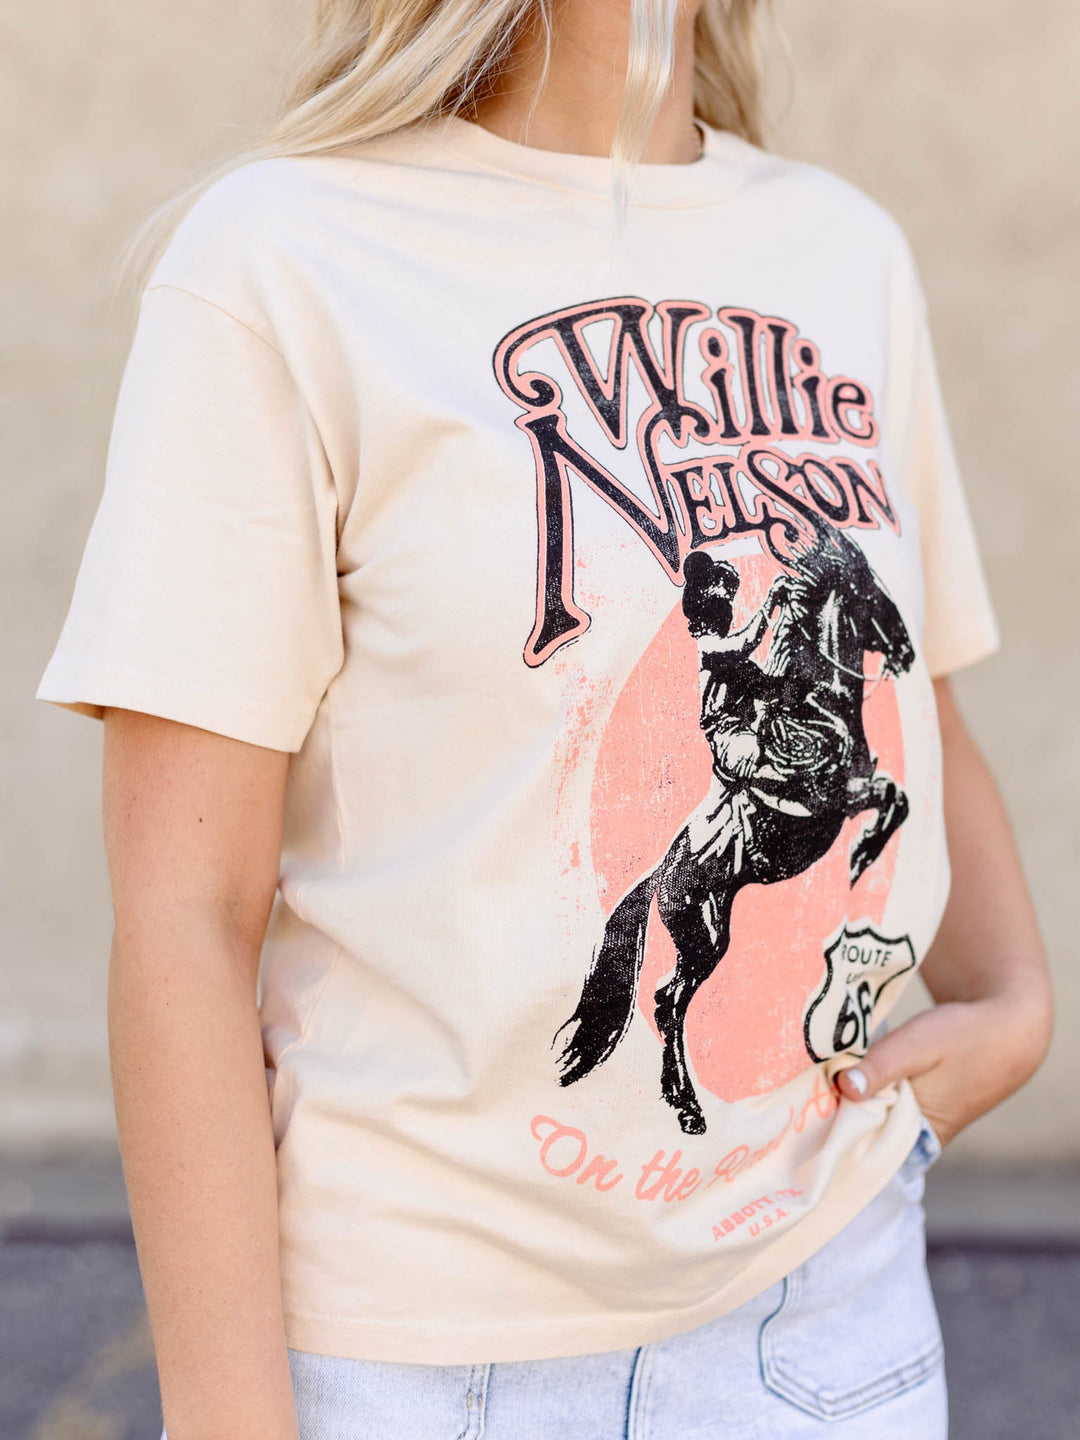 Daydreamer Willie Nelson Route 66 Weekend TeeScreen tees